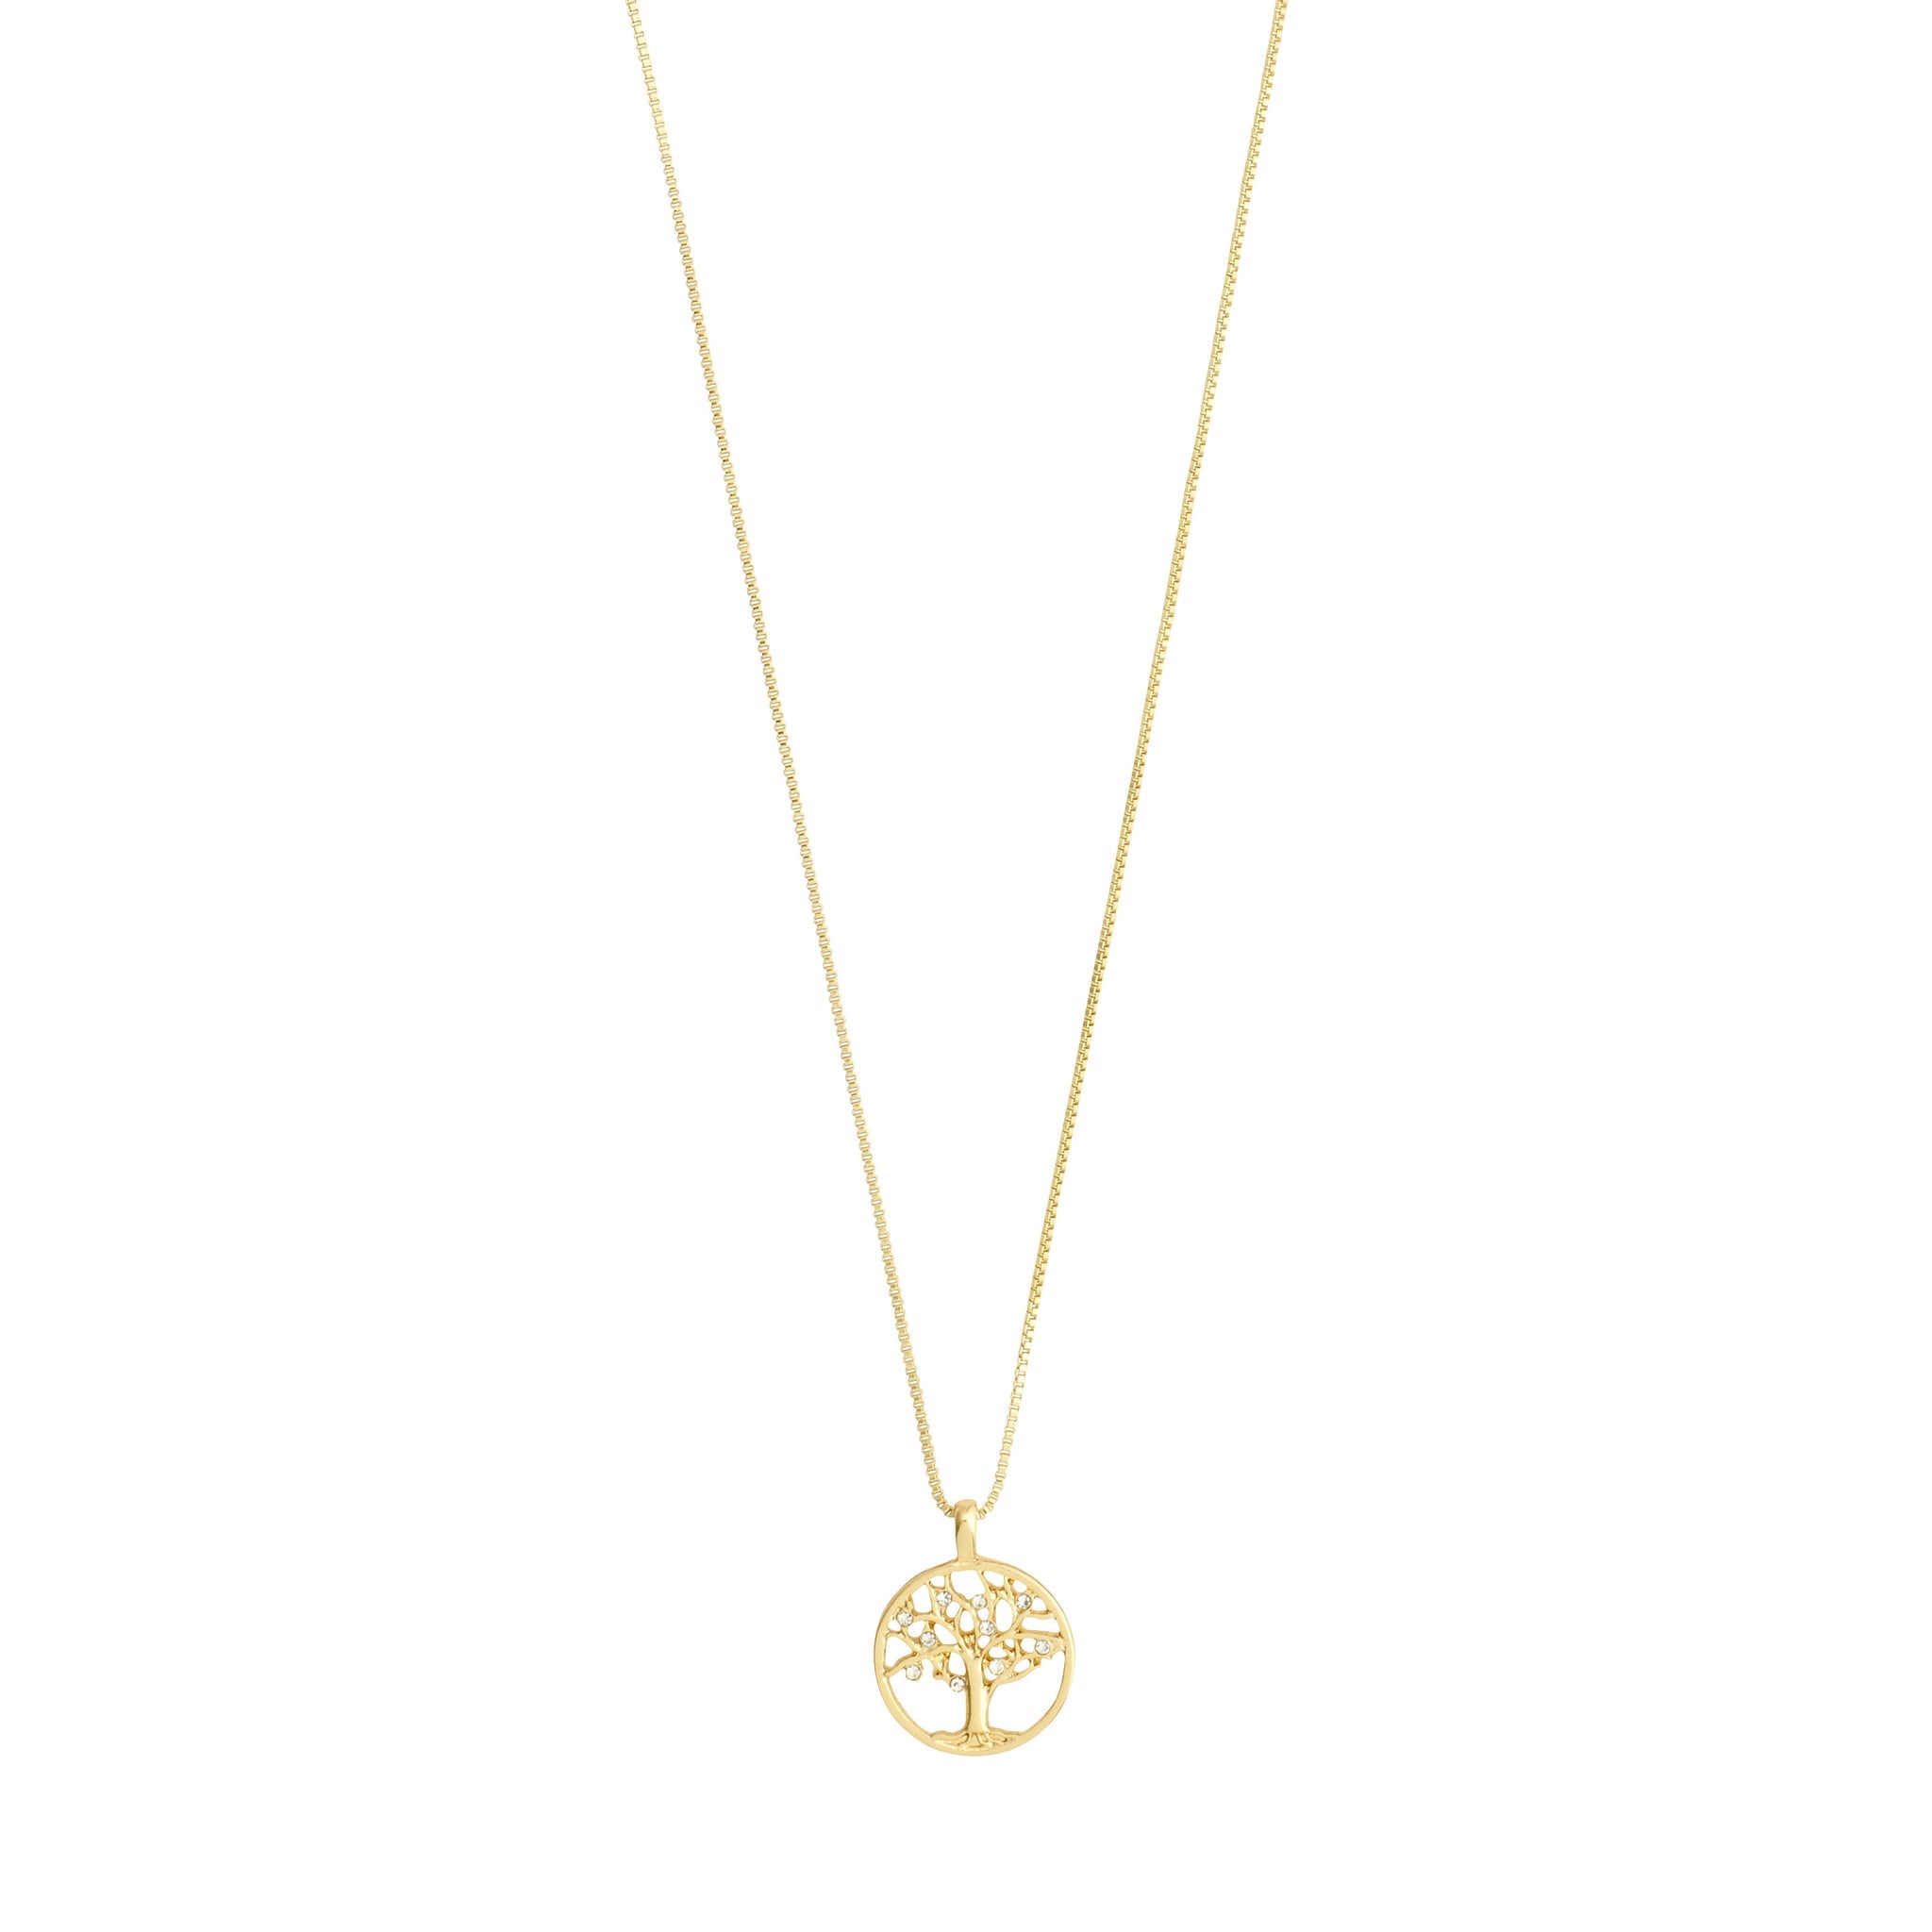 IBEN Recycled Tree of Life Necklace - Gold Plated